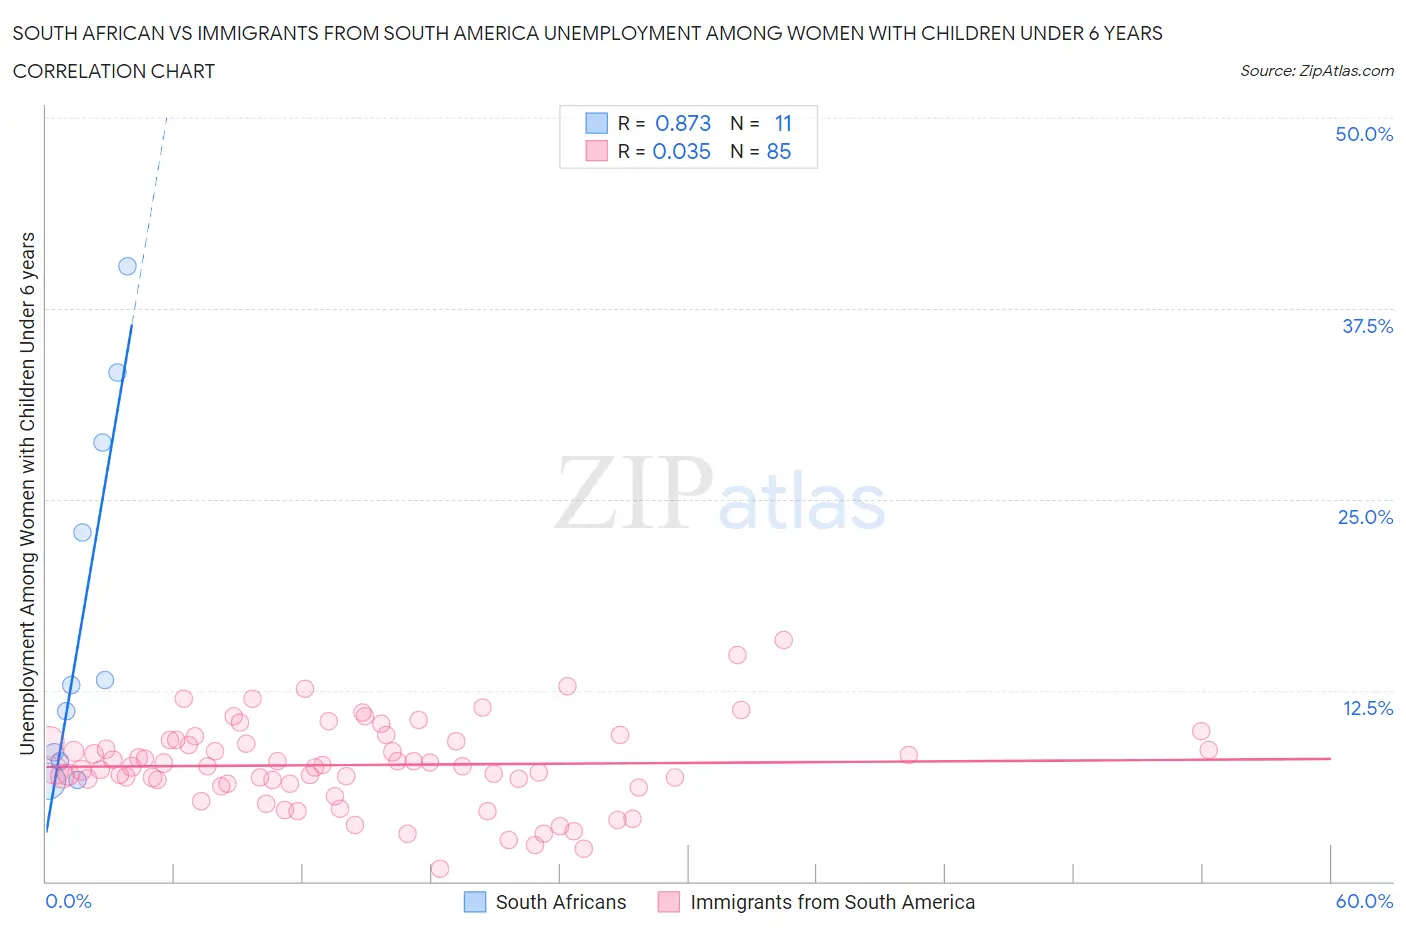 South African vs Immigrants from South America Unemployment Among Women with Children Under 6 years